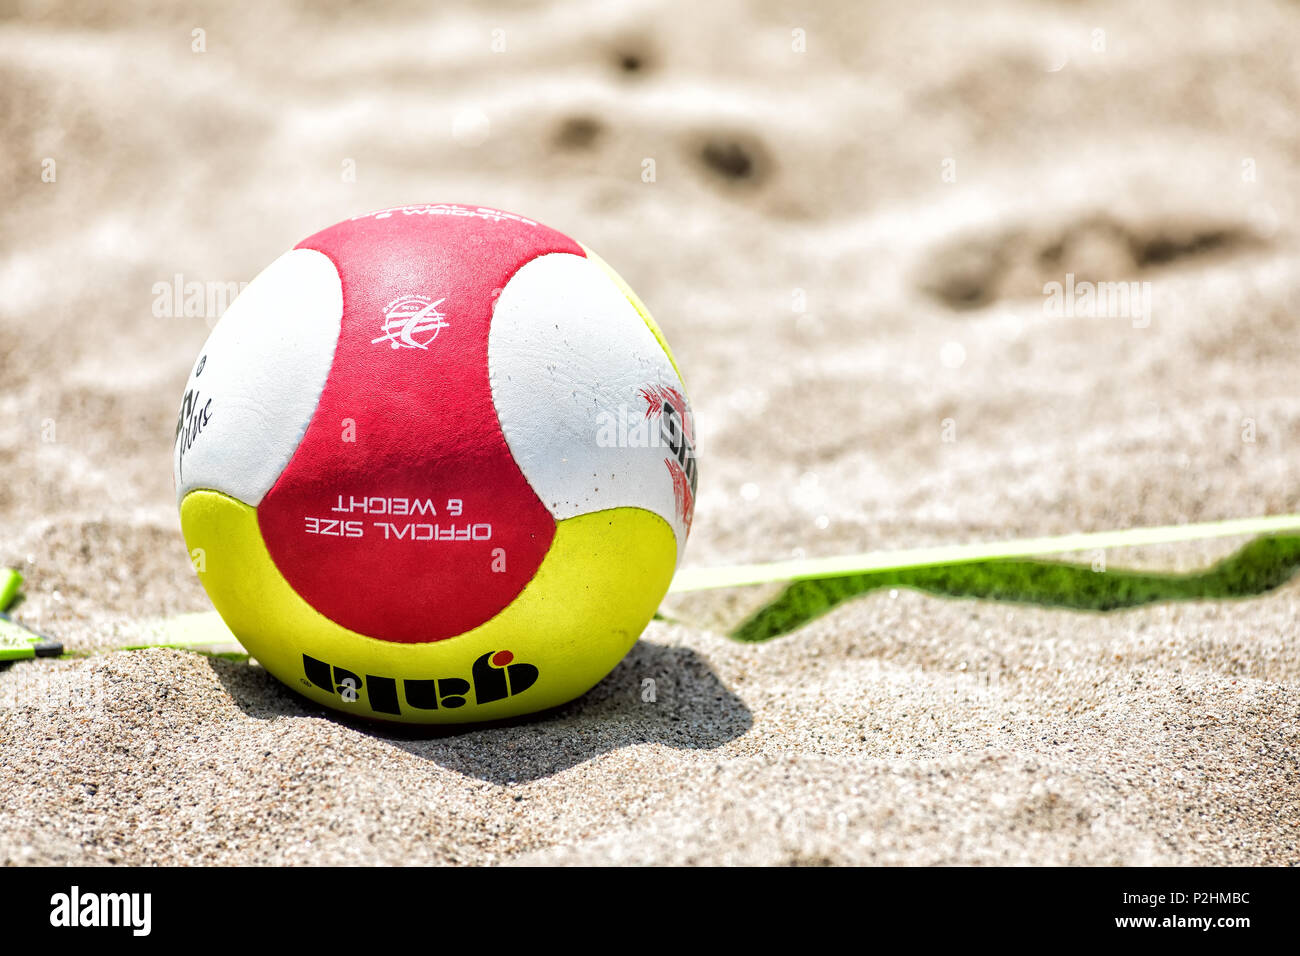 Thessaloniki - Greece June 8, 2018: Close-up the beach volley ball during  the Hellenic championship Beach Volley Masters 2018 at Aristotelous square  Stock Photo - Alamy